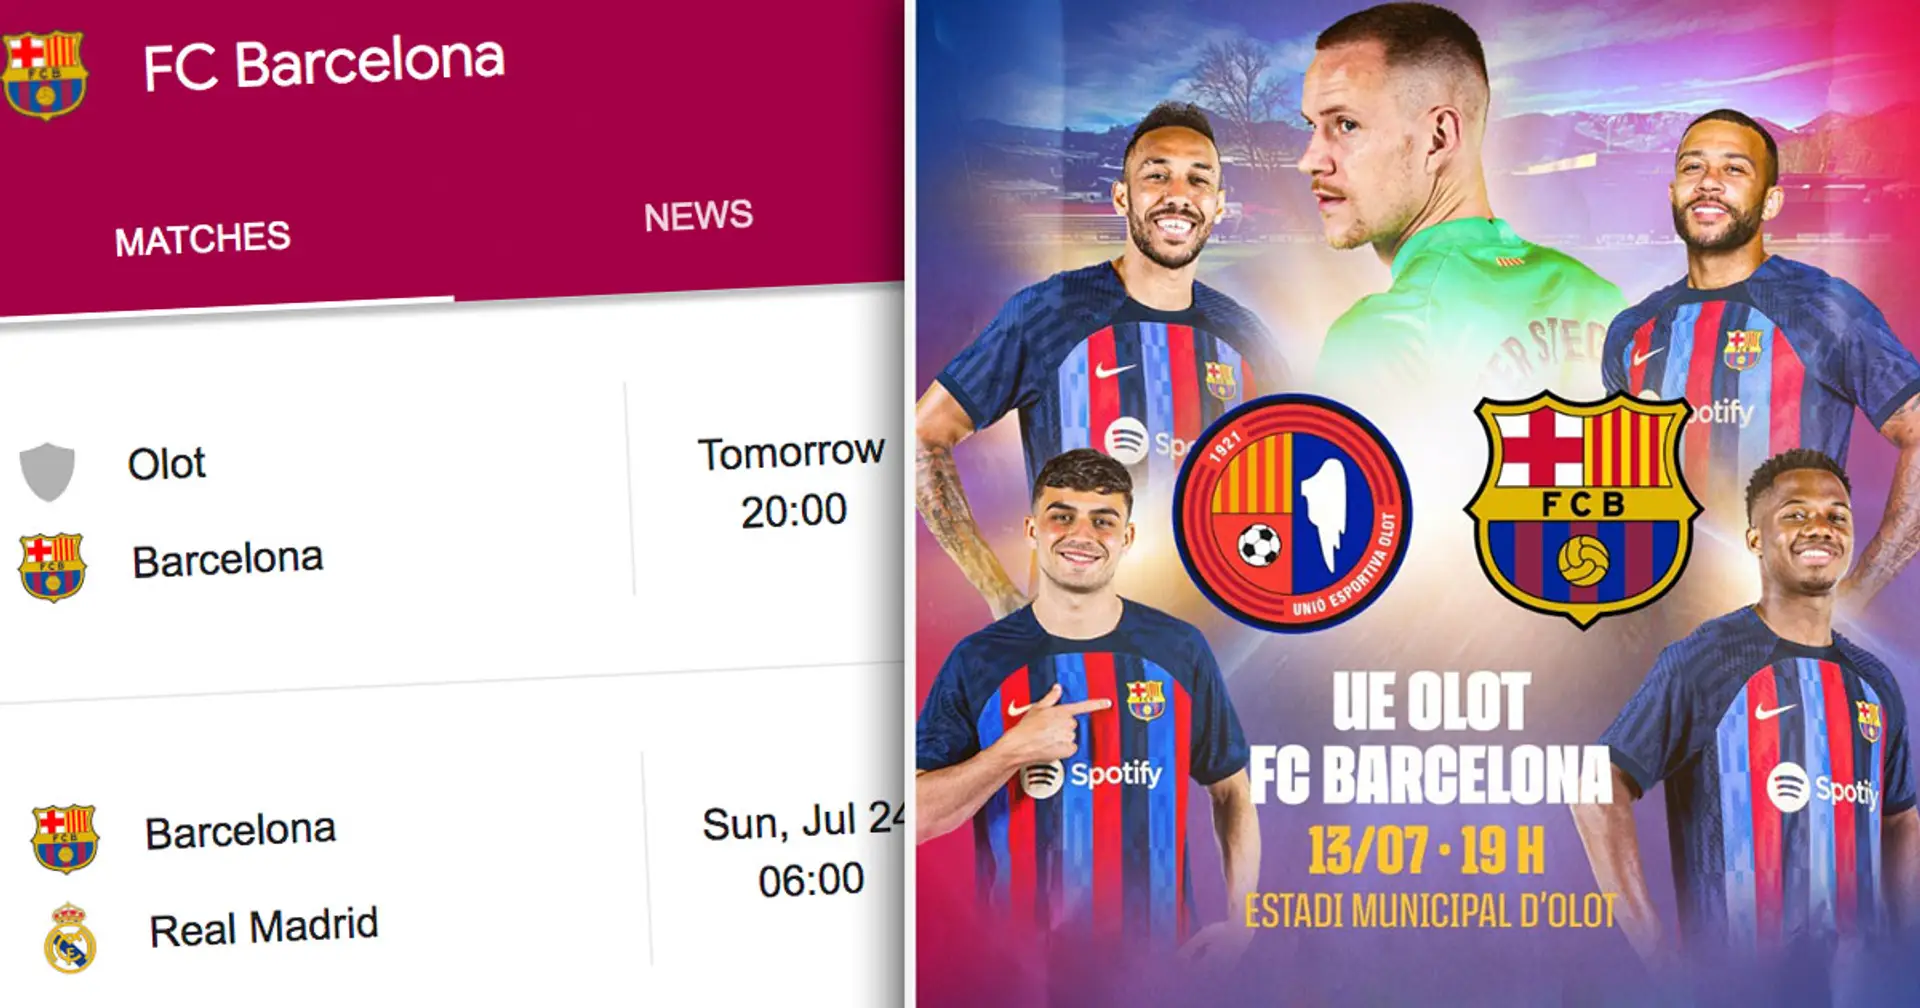 When and where to watch Barca's first pre-season friendly? Answered